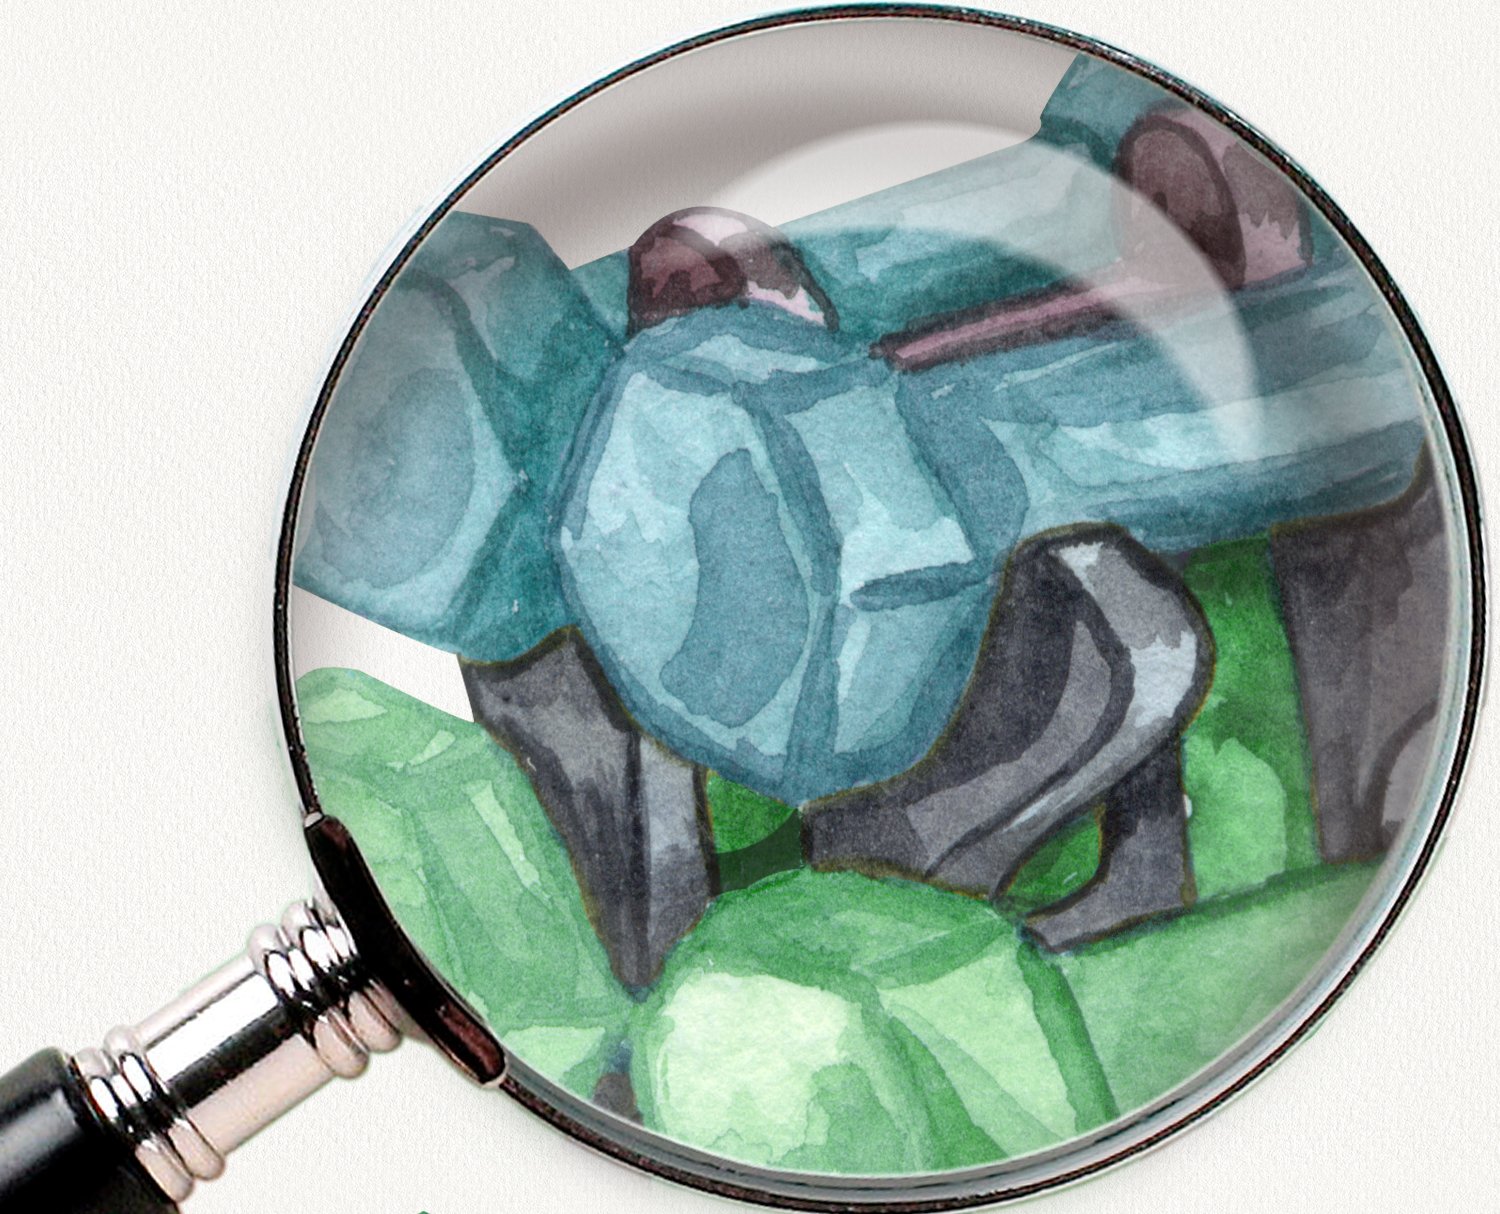 Watercolor image of a dumbbell under a magnifying glass.